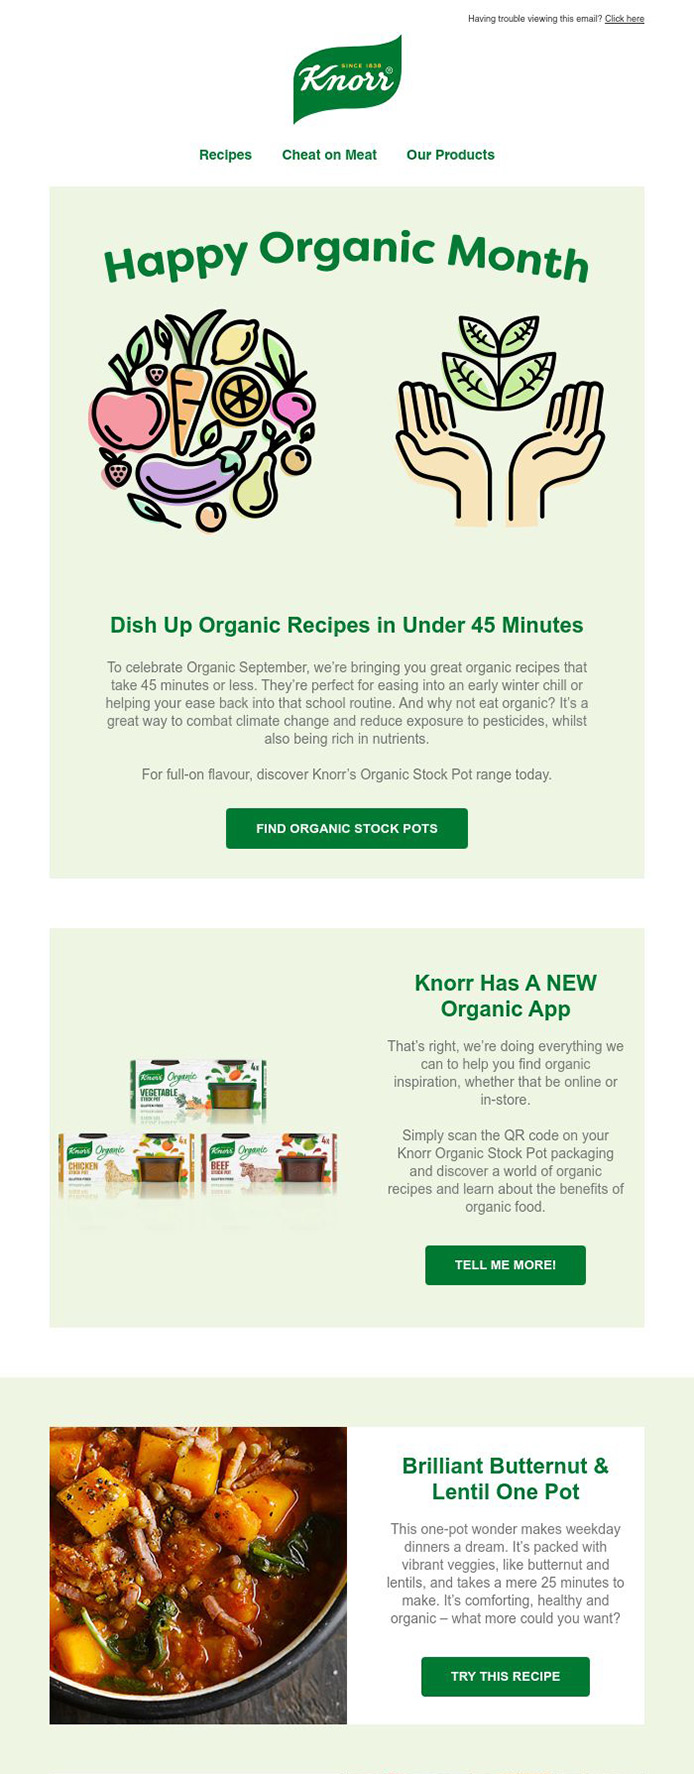 Knorr Happy Organic Month